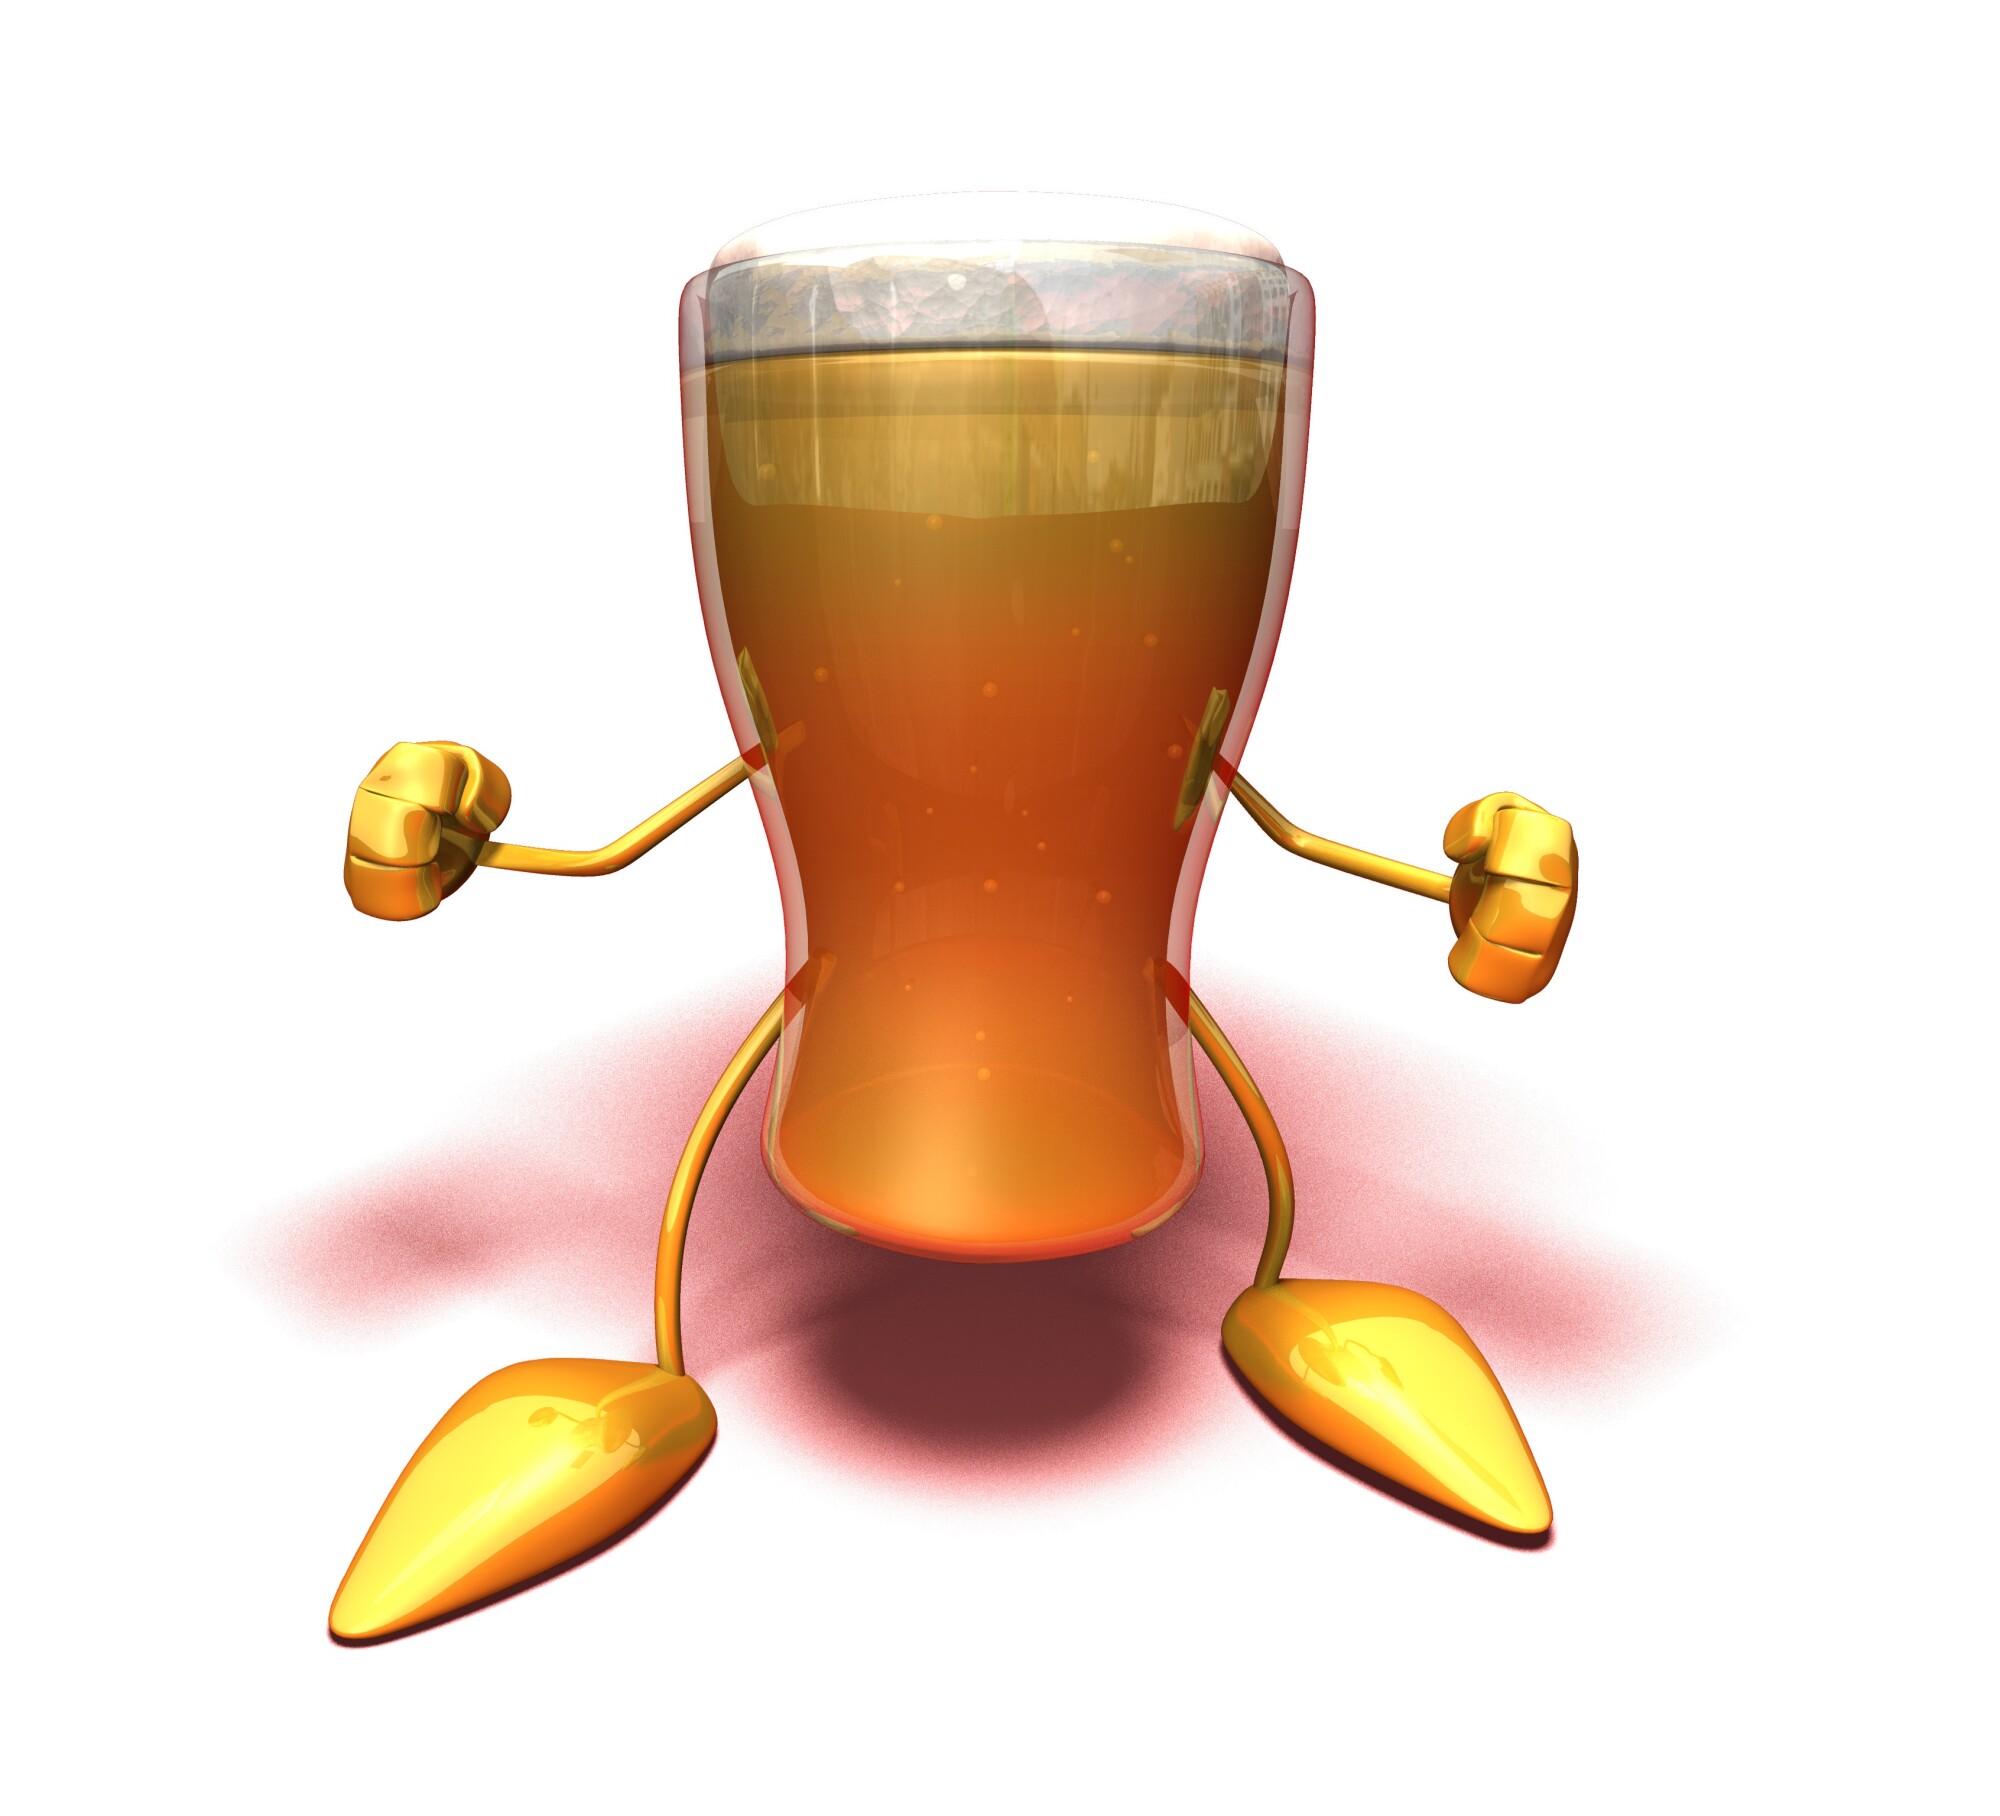 Full humanized beer glass with boxing gloves.